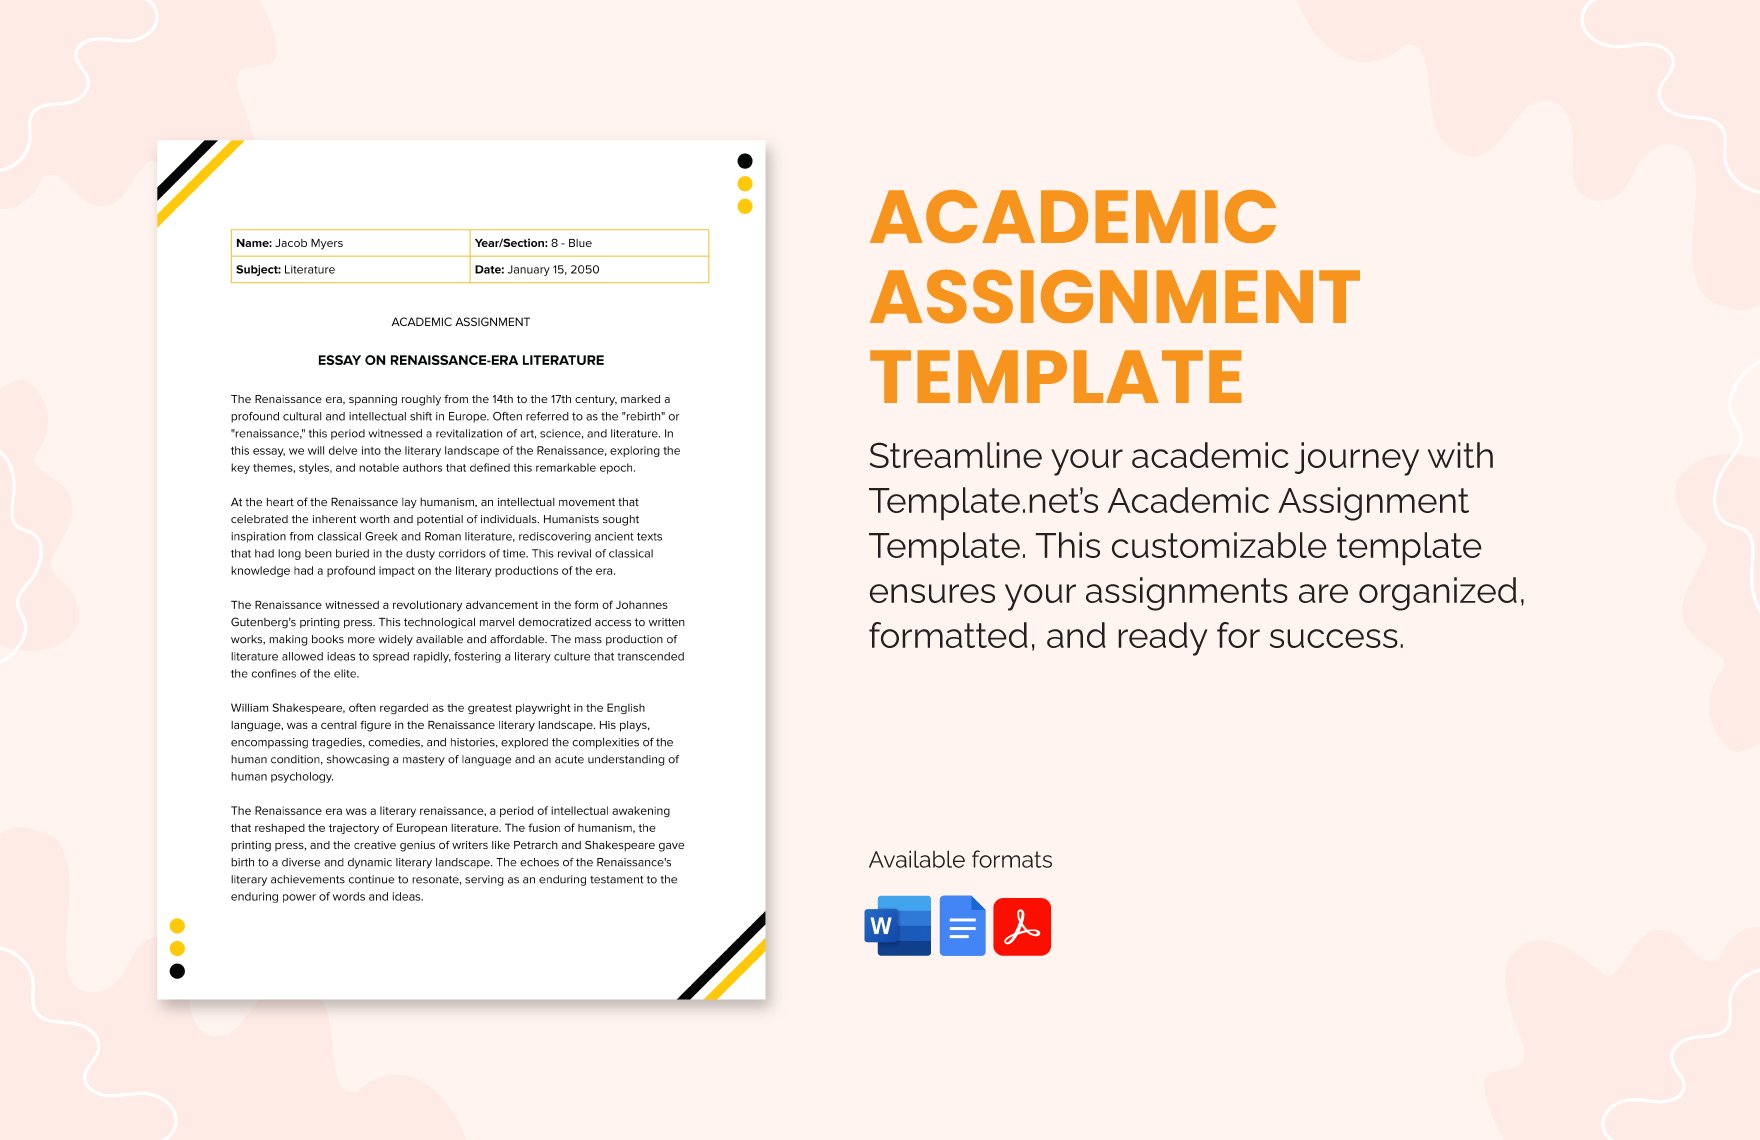 Academic Assignment Template